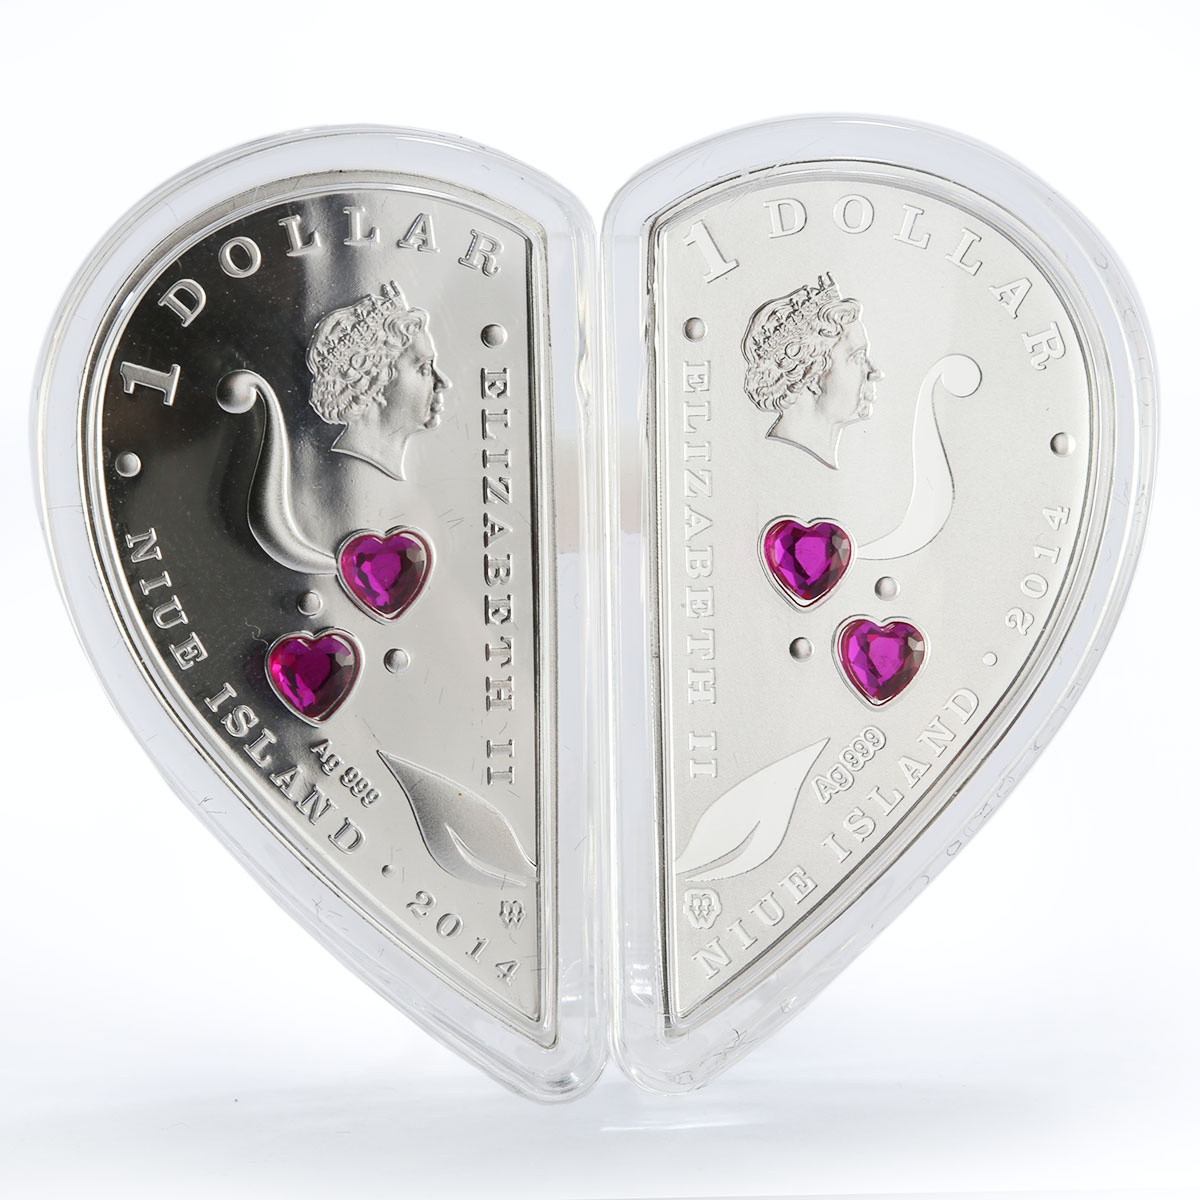 Niue set of 2 coins Always with You Heart Love colored silver coins 2014